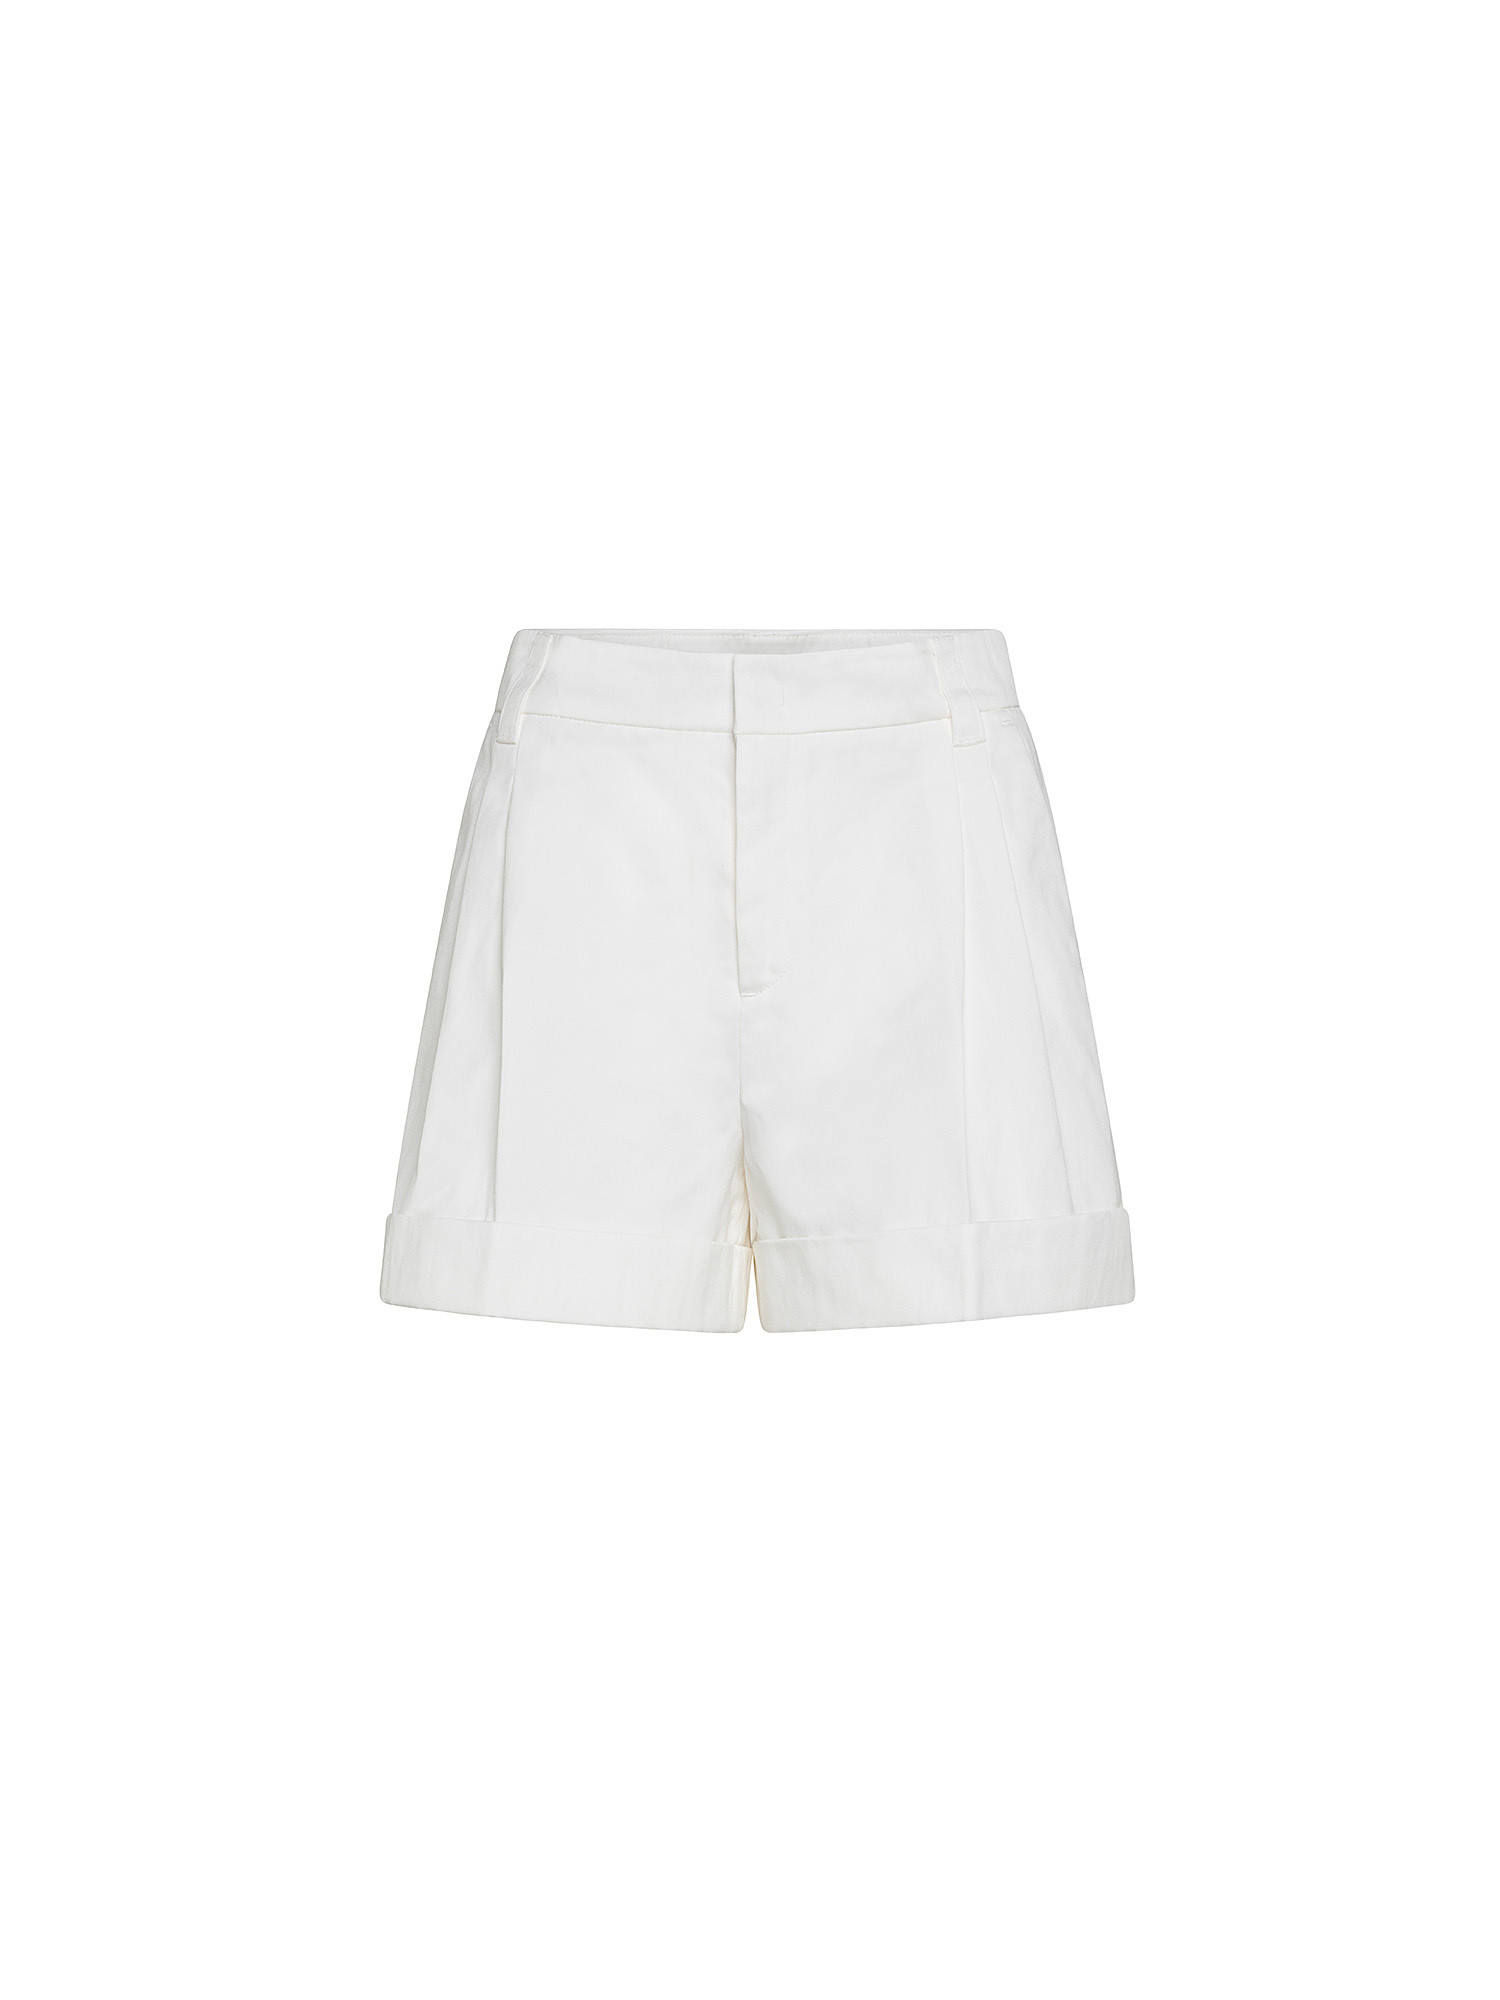 Shorts in raso opaco con cintura, Bianco, large image number 0